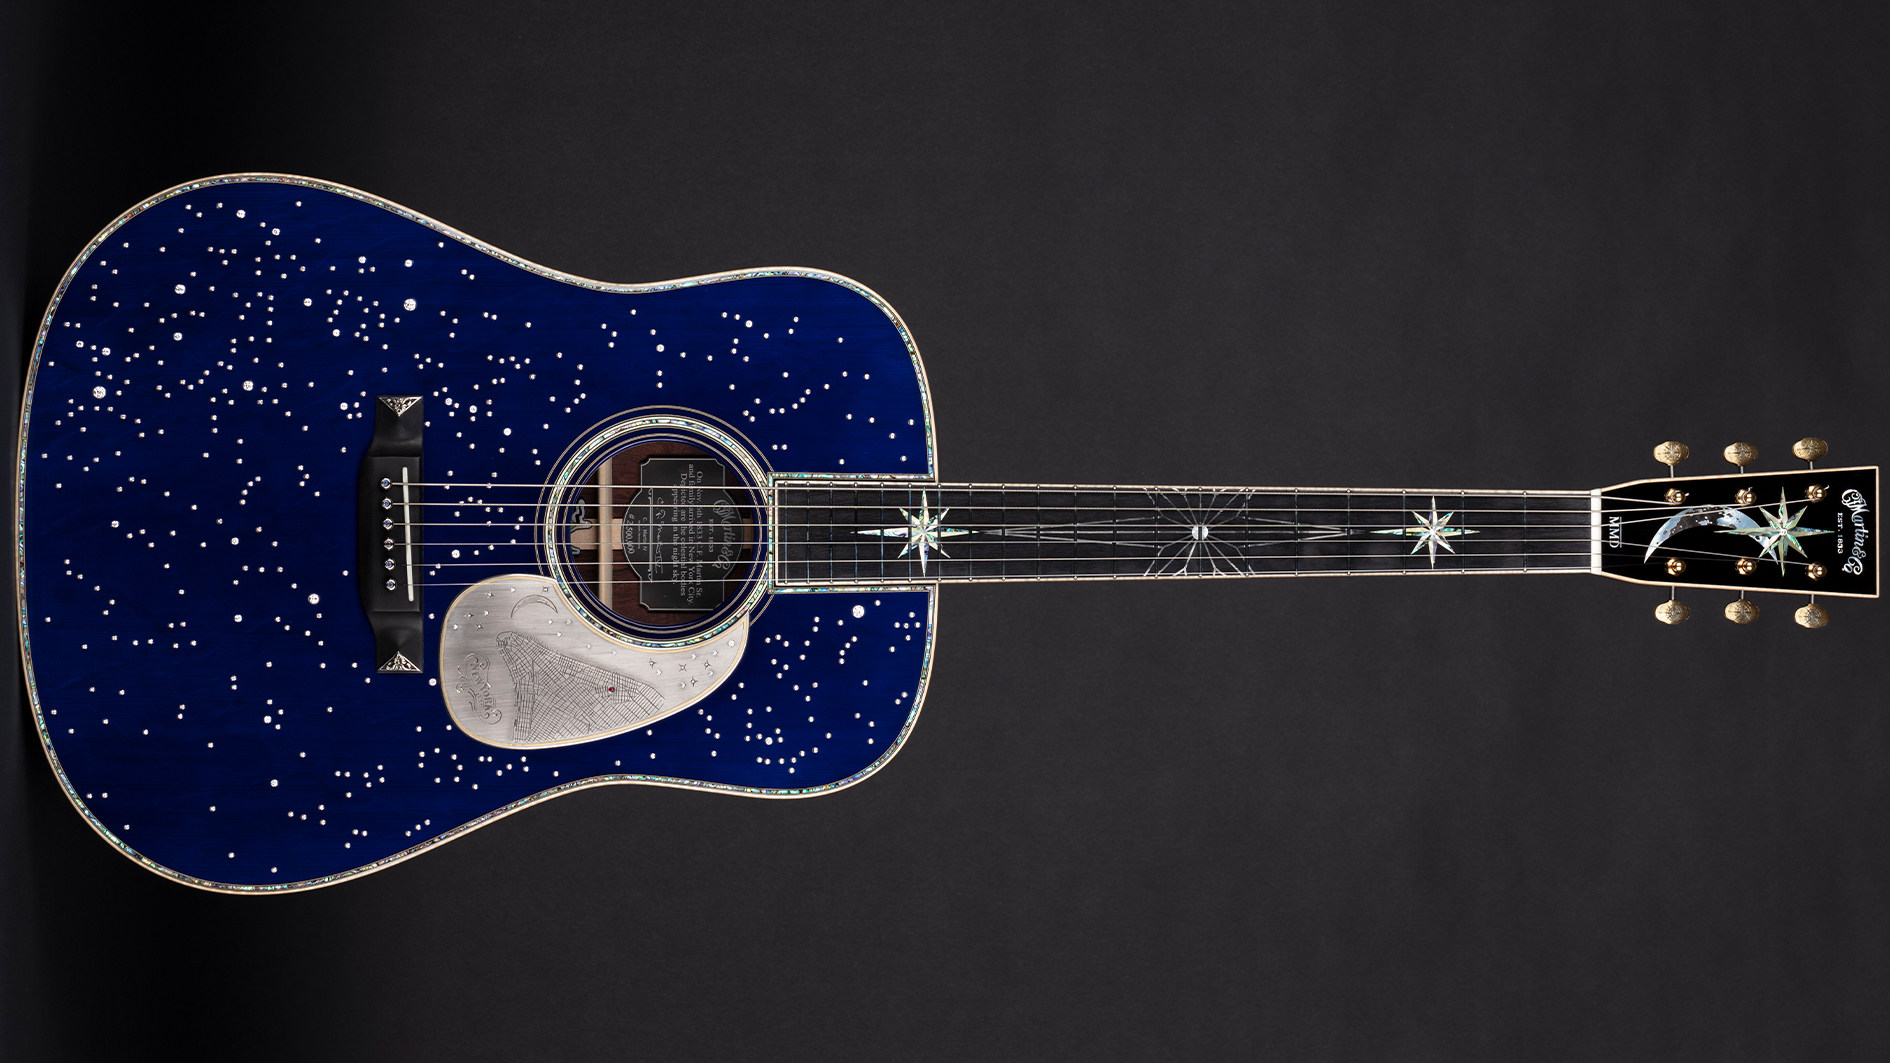 NAMM 2022: Martin unveils its 2.5 millionth guitar, a luxury acoustic encrusted with 436 diamonds